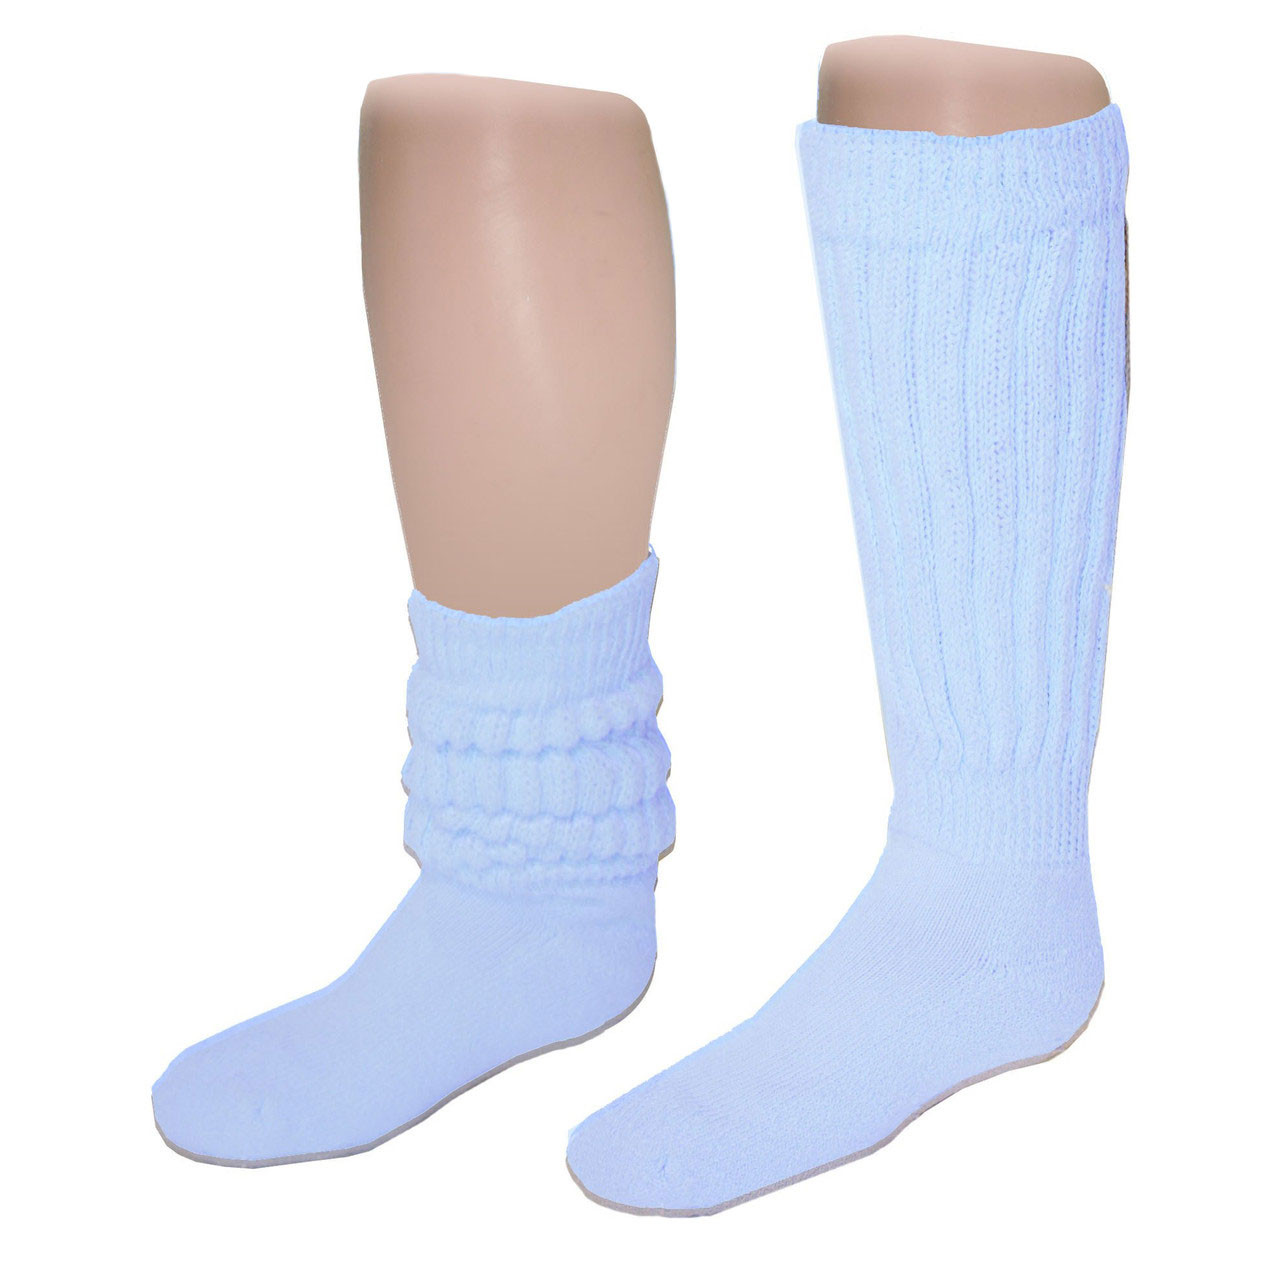 Slouch Socks Cotton Scrunch Knee High Extra Long and Heavy Socks